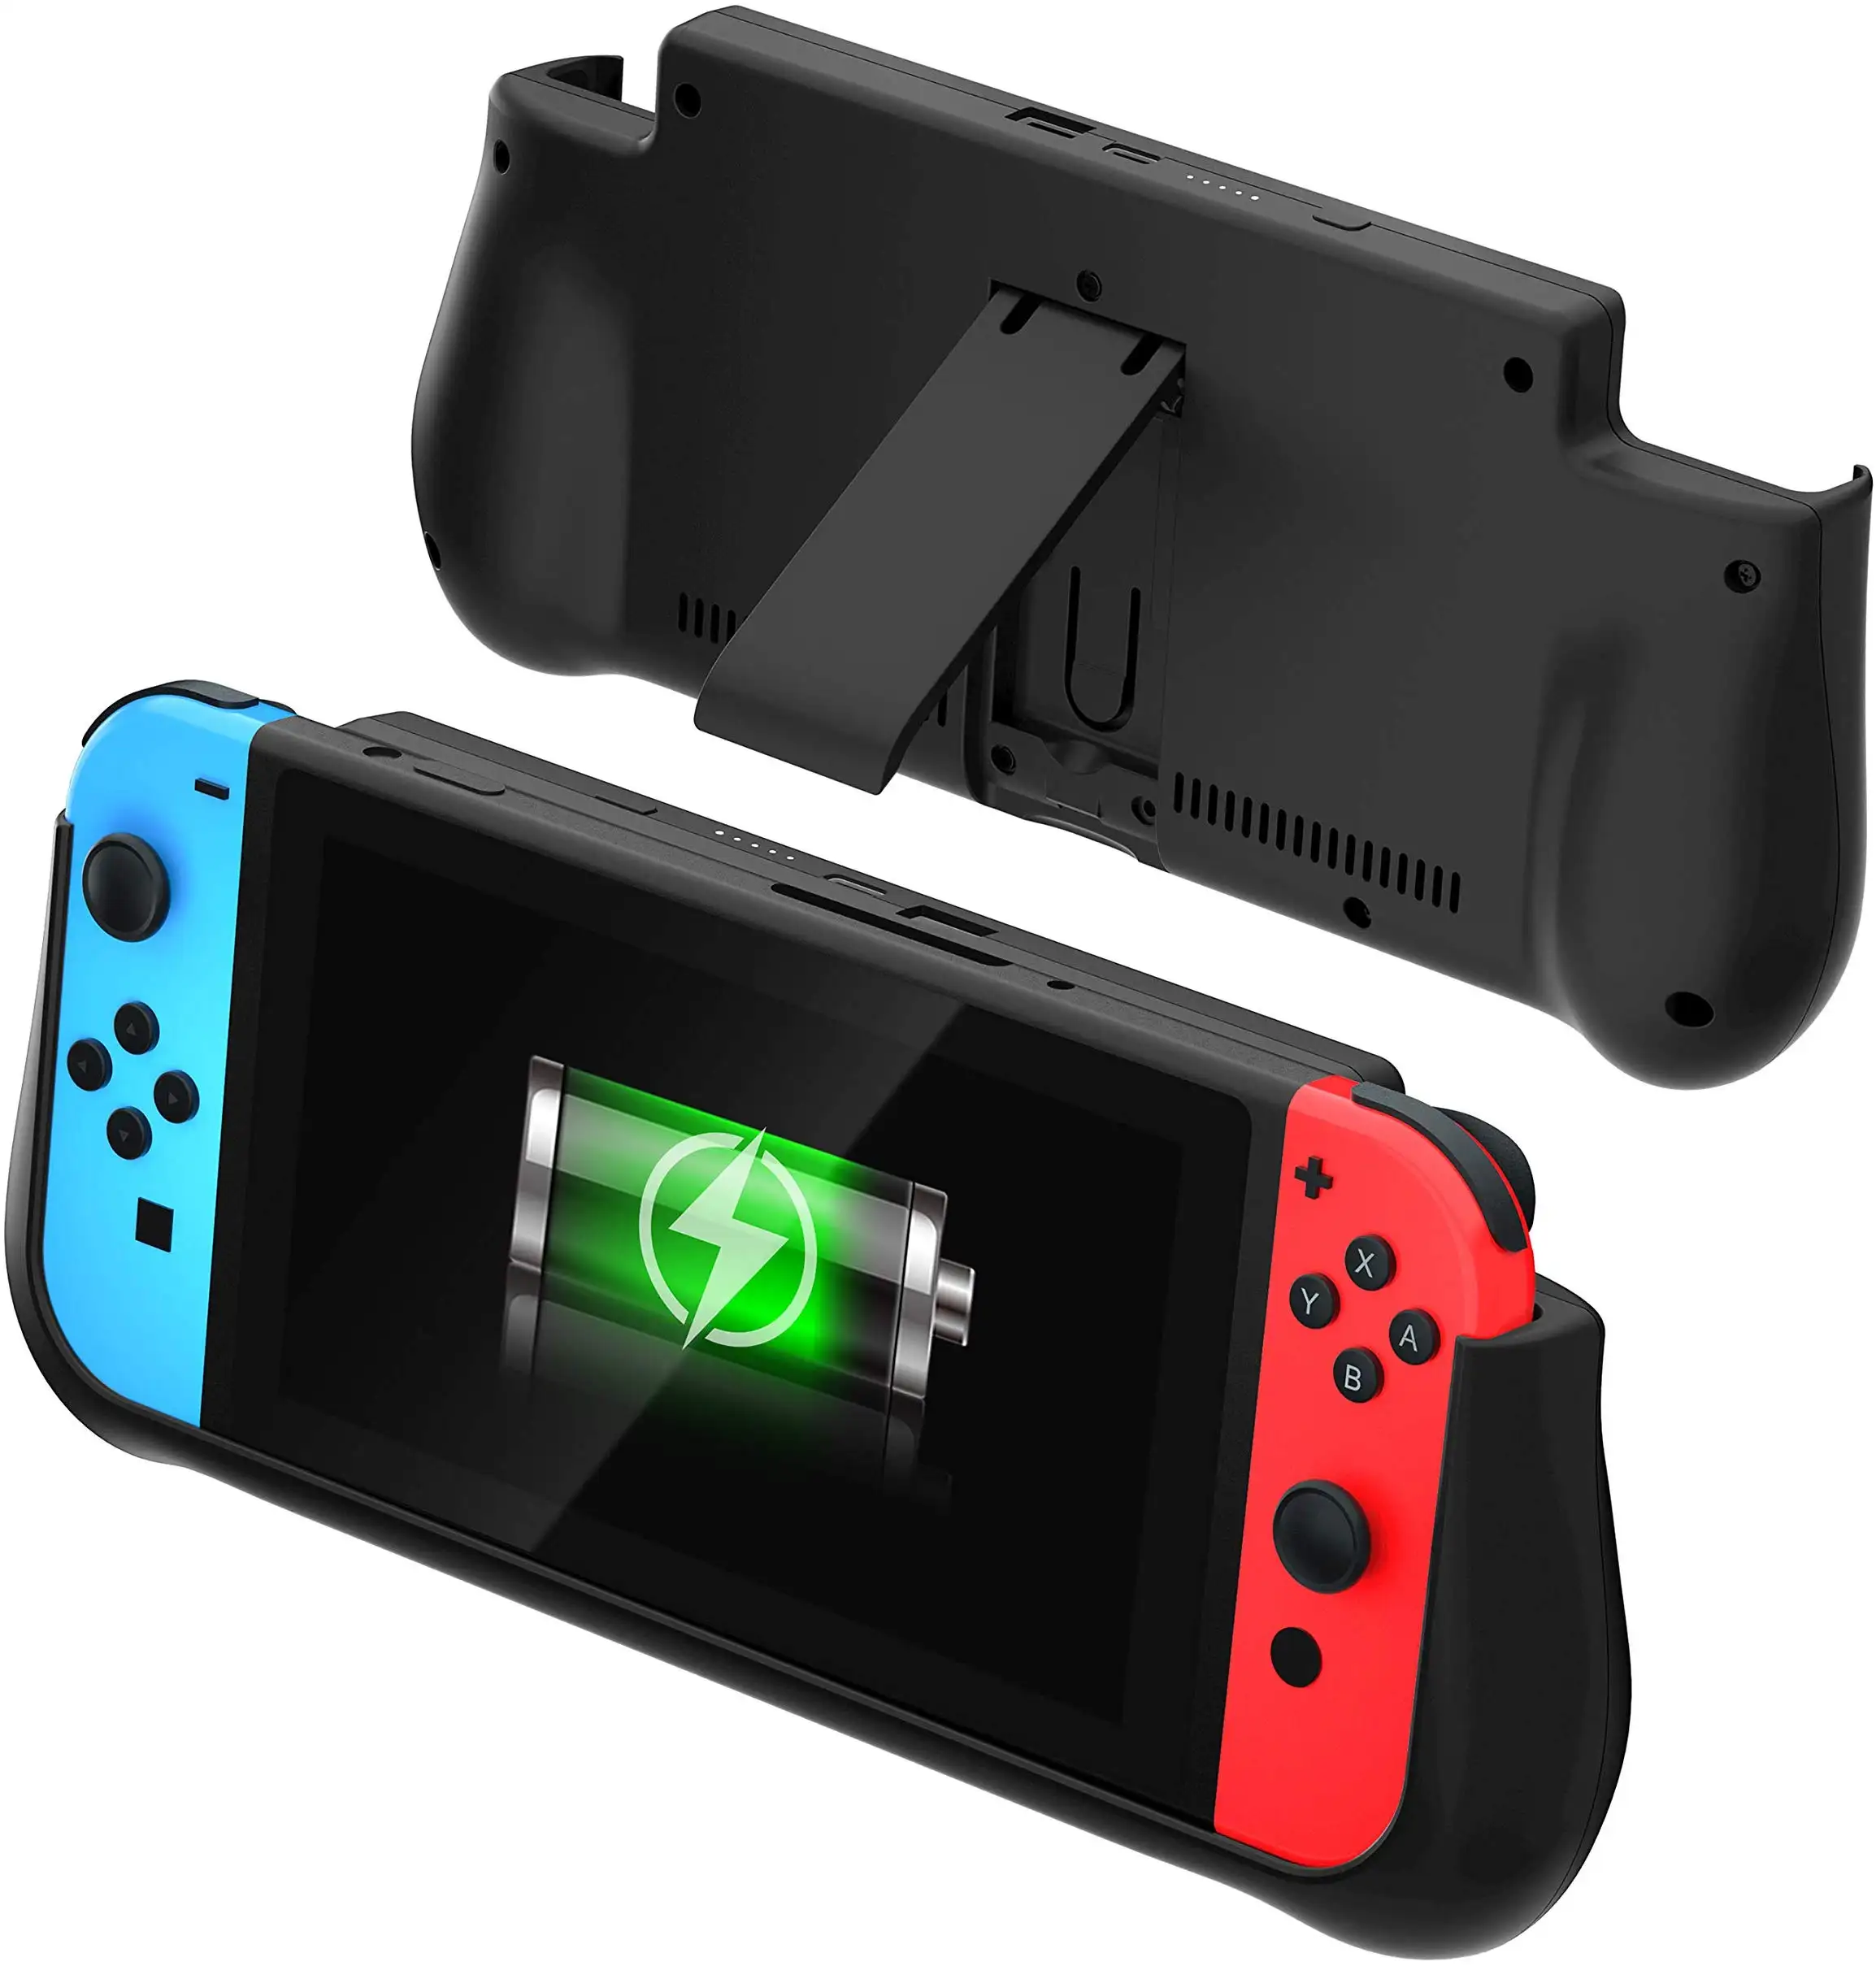 Battery Charger Case Portable Battery Case with 10,000 Mah Extended Travel Power Bank for Nintendo Switch